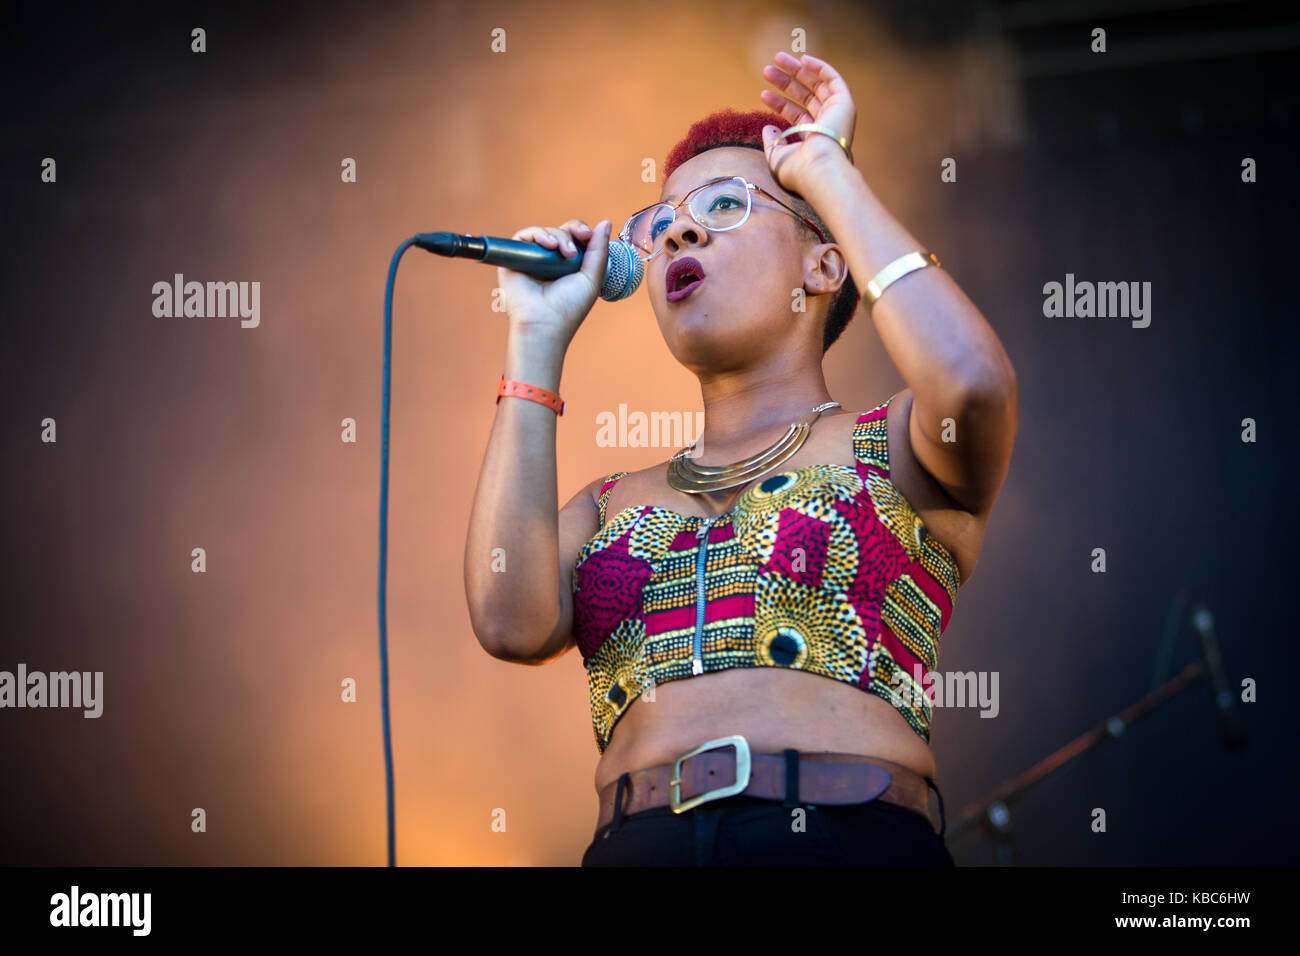 The Norwegian soul and jazz singer Miss Tati originates from Angola and Portugal before she ended up in Bergen where she is known as “Norway’s sassy soul mistress”. Here she performs a live concert at the Norwegian music festival Øyafestivalen 2015. Norway, 15/08 2015. Stock Photo